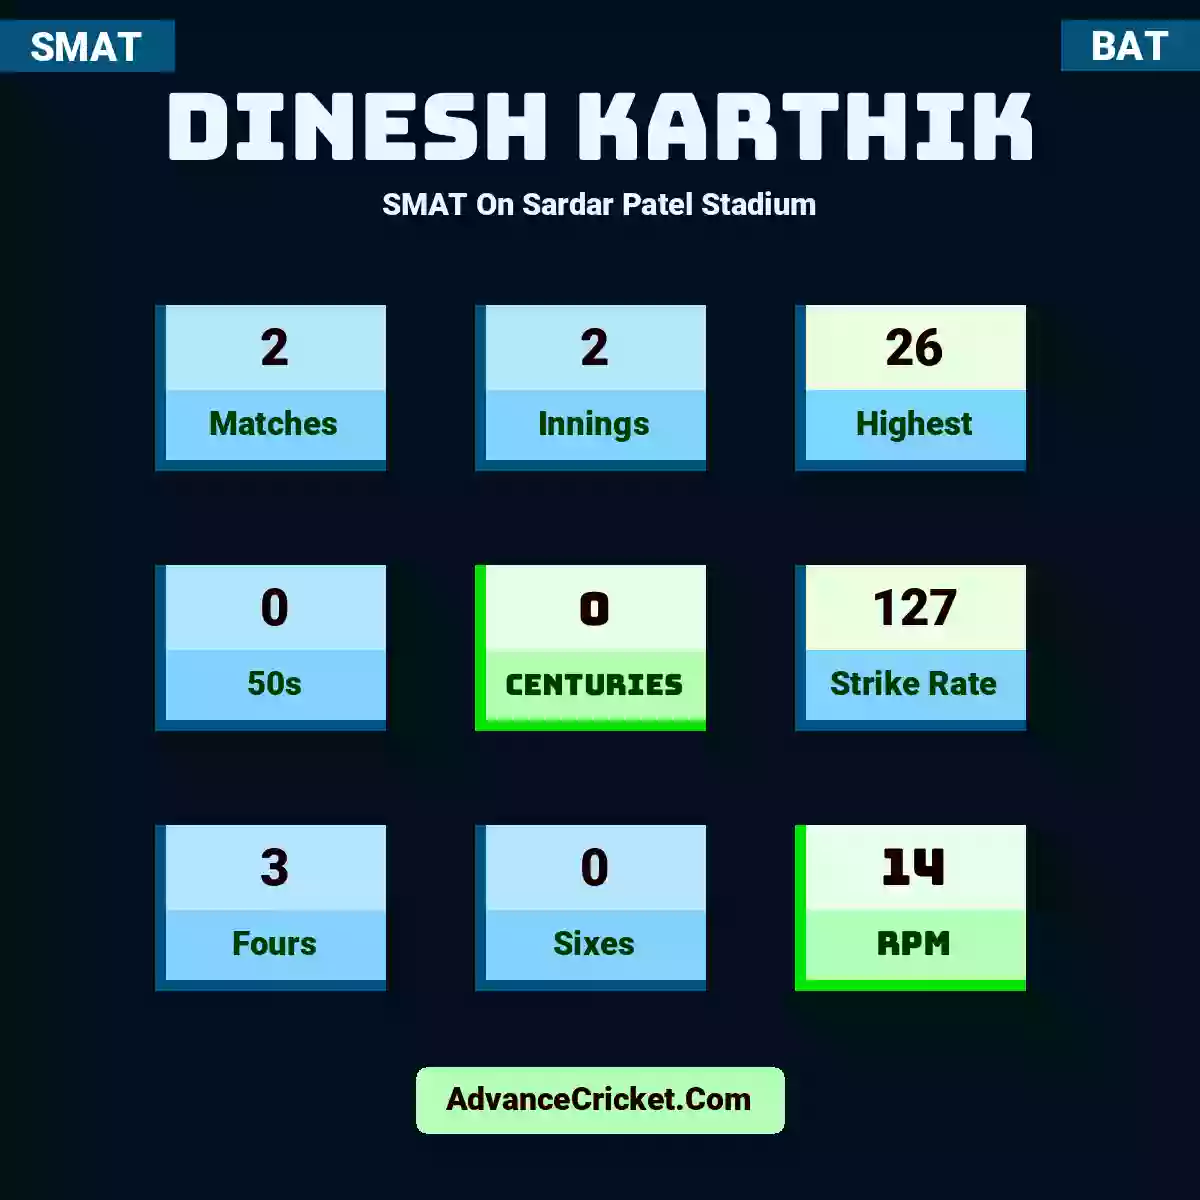 Dinesh Karthik SMAT  On Sardar Patel Stadium, Dinesh Karthik played 2 matches, scored 26 runs as highest, 0 half-centuries, and 0 centuries, with a strike rate of 127. D.Karthik hit 3 fours and 0 sixes, with an RPM of 14.